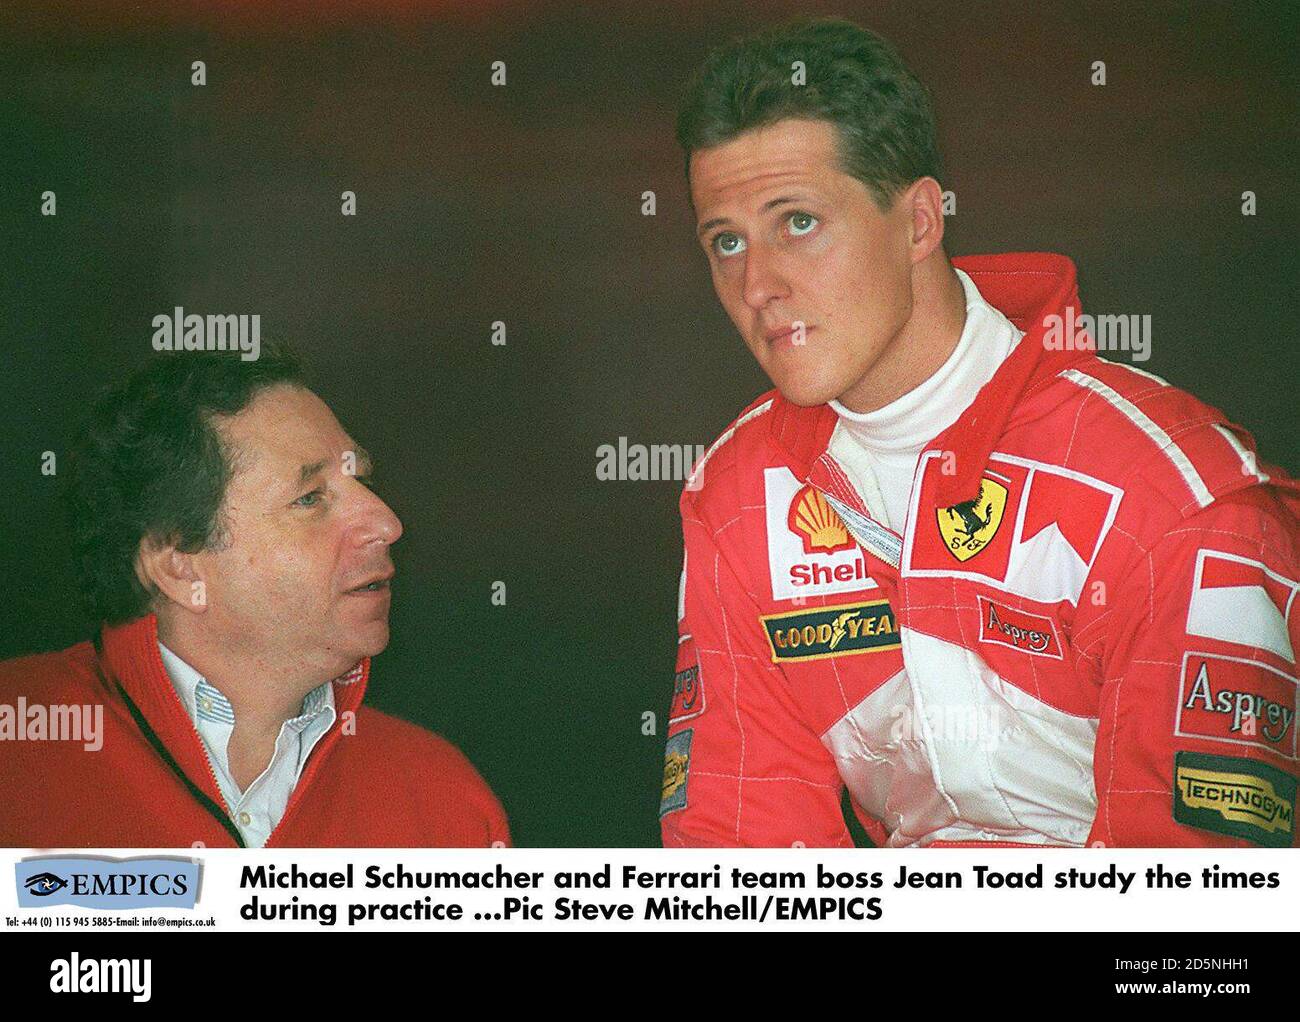 Michael Schumacher (right) and Ferrari team boss Jean Todt (left) study the  times during practice Stock Photo - Alamy